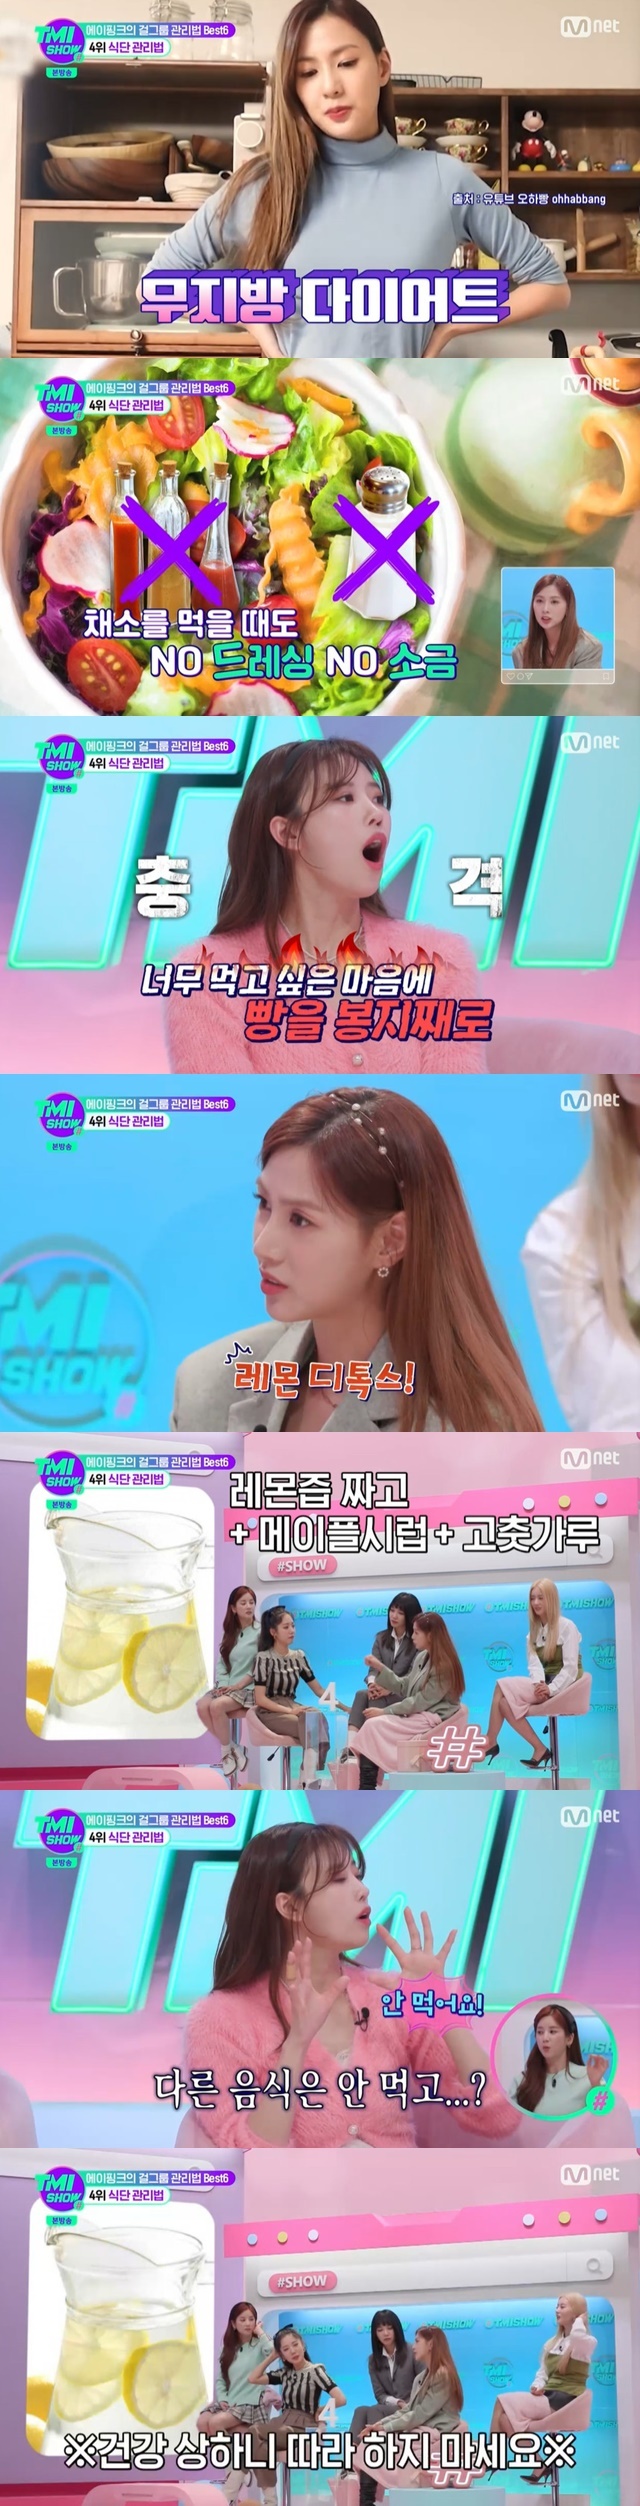 Apink has been shocked by the diet diet by unveiling the girl groups 12-year management law.Mnet TMI SHOW broadcast on February 16 featured Apink Park Cho-rong, Yoon Bomi, Jung Eun-ji, Kim Nam-joo and Oh Ha-young.On the day of the show, the 12-year girl group Apink released the BEST6 chart of the management law.Yoon Bomi enjoys swimming and tennis in the third stage of Taekwondo, and Park Cho-rong is good at nunchucks by learning Aikido for nine years to his father,Jung Eun-ji boasted a perfect jeans fit with steady management, and Son Na-eun has been greedy for instructors for 10 years.Jung Eun-ji said, I have a radio every day and I go to work out and play radio. When Boom asked, Do you feel like your physical strength is different from before?Its serious, its hard to open your eyes, he said. The physical age test revealed that the youngest Oh Ha-young was in his 20s, the best.The fifth place in the Apink management law is joint management. Physical therapy and frequency therapy are essential for Apink.Kim Nam-joo said he was concerned about pillows and mattresses at the age of 21 because he had slept on a bed mattress on the second floor since he was 17 years old.Now, were spending the most on mattresses than any other thing, raising the quality of sleep on the best mattresses, Kim Nam-joo said.The Apink Management Act ranked fourth in the diet control law.The youngest, Oh Ha-young, explained that he ate a non-province diet diet with a 13kg weight loss secret and ate vegetables salad with minimal dressing and salt.Oh Ha-young, who usually likes bread, surprised everyone by saying, When I dieted, I chewed it on a plastic bag because I wanted to eat bread or rice cake.Oh Ha-young also said, It is lemon detox, but it is squeezed with lemon juice, and it puts maple syrup and red pepper powder. Park Cho-rong said, The presence of red pepper powder is the reason for disintegrating the body.The water is the only thing that eats a week, Oh Ha-young said. I dont recommend it, he said.The Apink Management Act, the third-largest, is the Sleep Management Act.Park Cho-rong revealed a bag like a pillow, saying, It is a bag that I bought to use as a pillow because I often sleep in a sleepy way. The production team found common points in the Apink service performance.Apink is all undoing her hair when she goes to a performance in the service, which is to prepare her hairstyle to be broken even if she sleeps on the move.When Boom asked, How many hours did you sleep when you were busy? Kim Nam-joo replied, Ive never slept before. Park Cho-rong said, Some people sleep in the waiting room and have no memory in the shop.When the Americas worried that if they could not sleep too much, they would not be pressed by scissors, Park Cho-rong said, I saw ghosts. I ran to bed like this.Boom shivered, I thought Bomi was here to wake you.The second place in the Apink Management Act is the neck management law. The three main vocals of Apink main vocal Jung Eun-ji are salt water gaggles, water drinking, and bass training.When Jung Eun-ji said, The sound of the bass is solid, and the high sound is getting higher. Boom immediately confronted the bass, saying, Is it possible lower than a man? Jung Eun-ji was impressed with a solid bass.The first place in the Apink Management Act is stress management. Apink recognizes stress first, and when it is difficult, it relieves stress by going on a trip or eating.Yoon Bomi cited the sweetness of the dog sugar as a stress relief method, and Park Cho-rong said, I was not able to talk about my heart and just talked to the members.The members listen well, and they have a lot of empathy. I think I was so stressed out. Thats the best, he boasted.